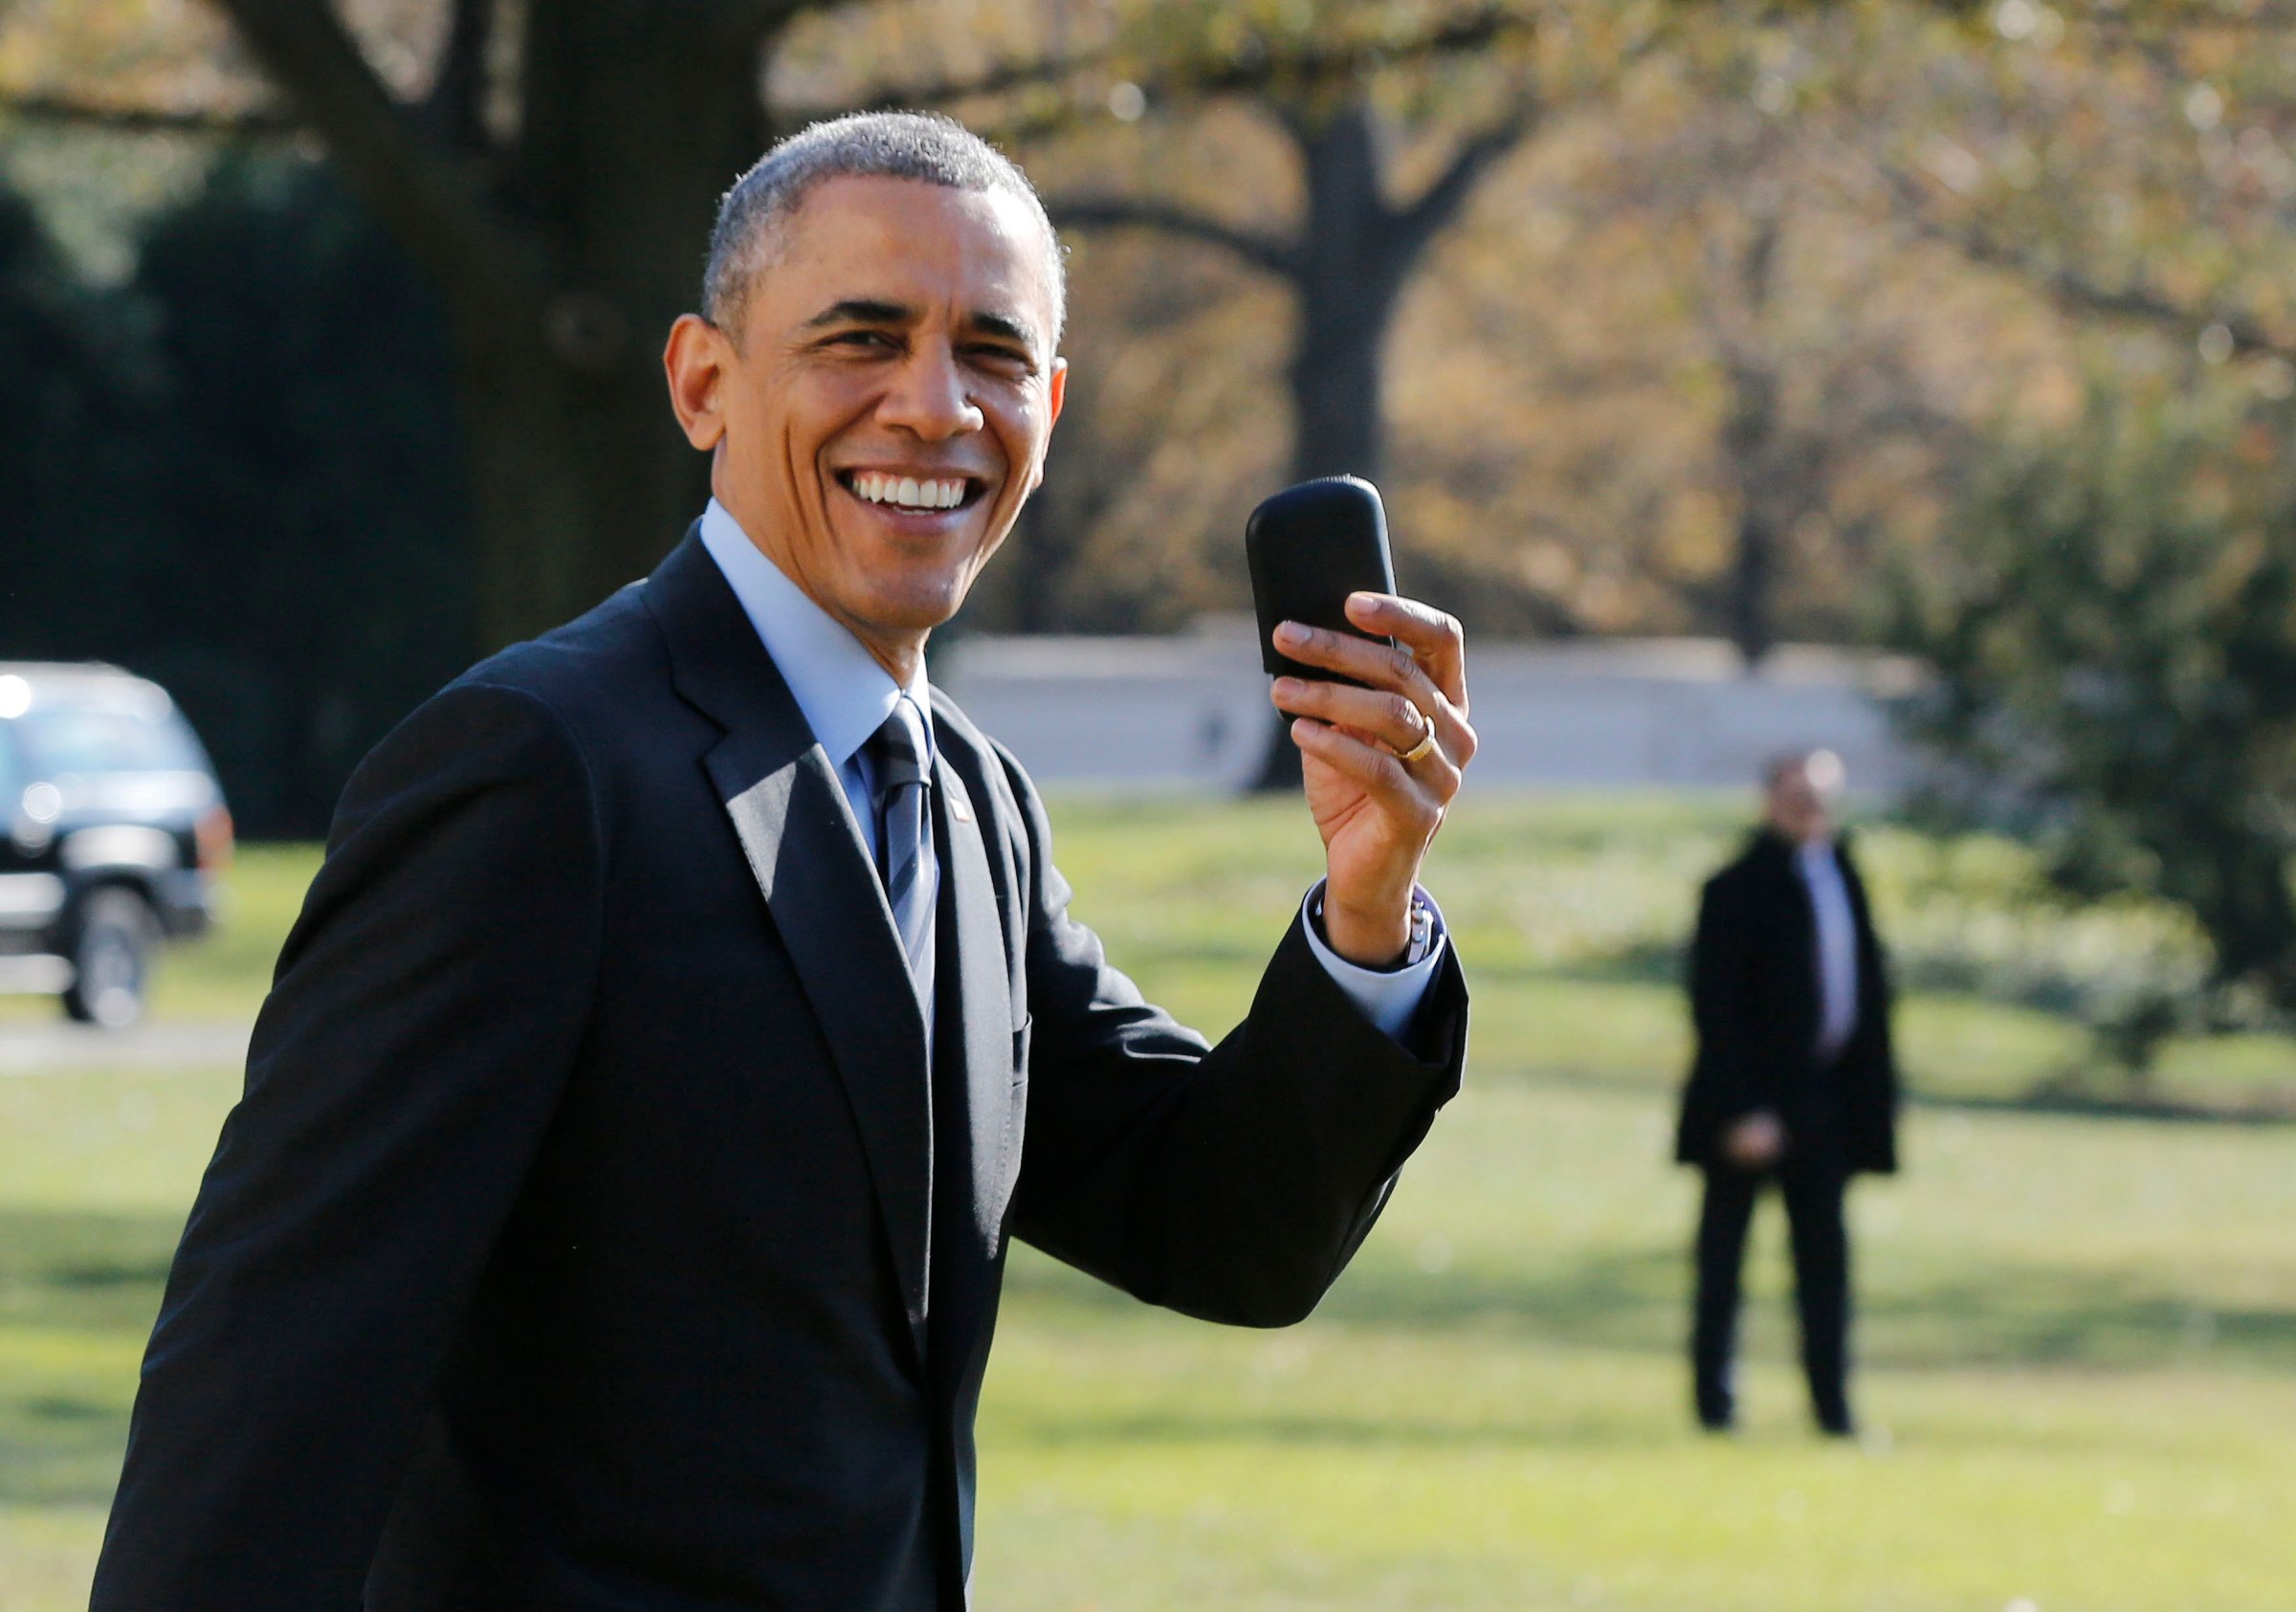 U.S. President Barack Obama holds up his BlackBerry device after he returned inside the White House to retrieve it, after boarding Marine One on the South Lawn of the White House in Washington on Nov. 21, 2014.